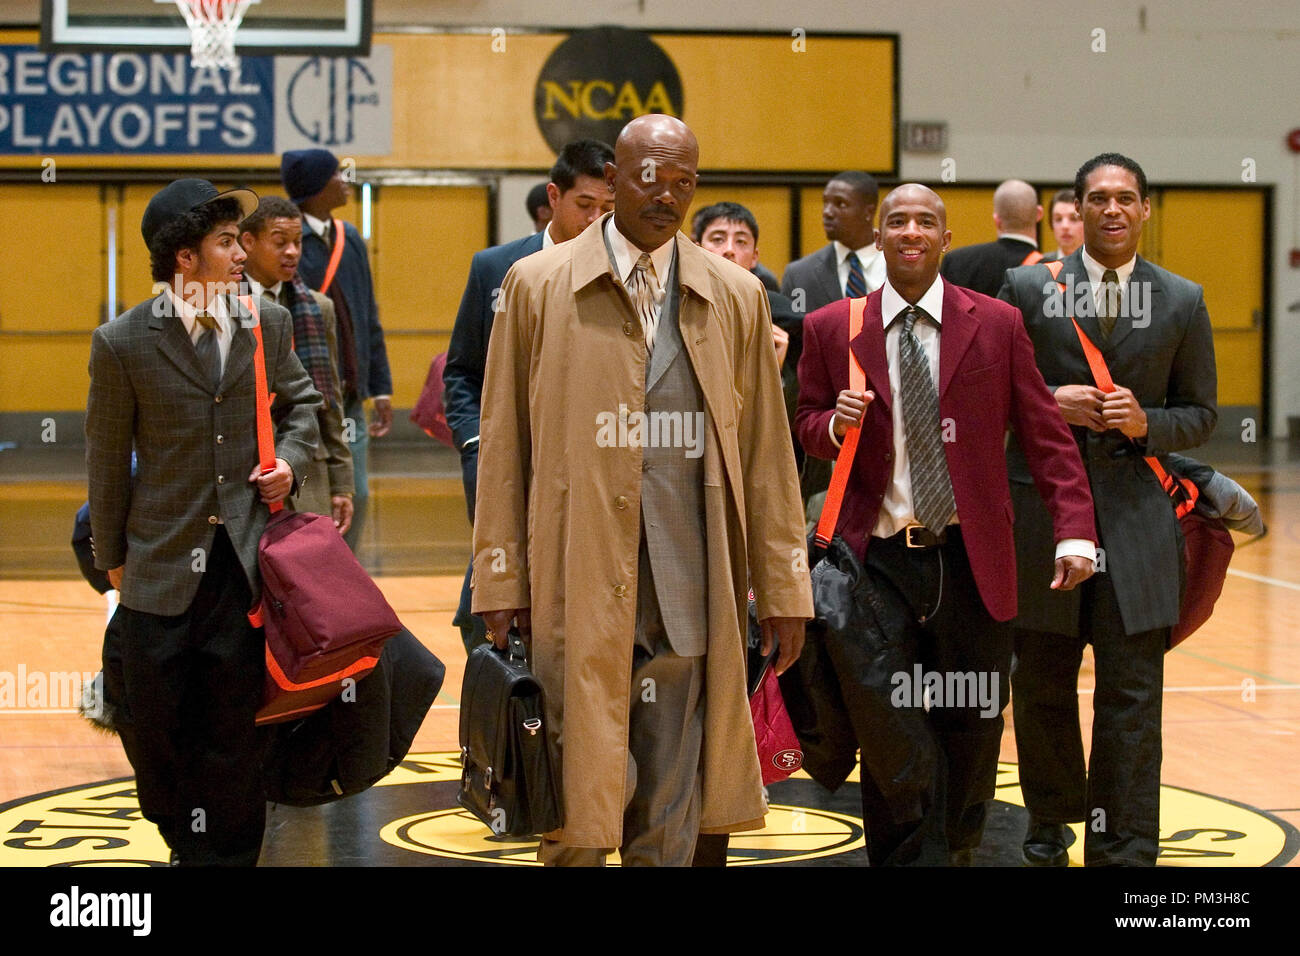 Film Still from 'Coach Carter' (front row, left to right) Rick Gonzalez, Samuel L. Jackson, Antwon Tanner, Texas Battle © 2004 Paramount Pictures Photo Credit: Sam Urdank  File Reference # 30735949THA  For Editorial Use Only -  All Rights Reserved Stock Photo